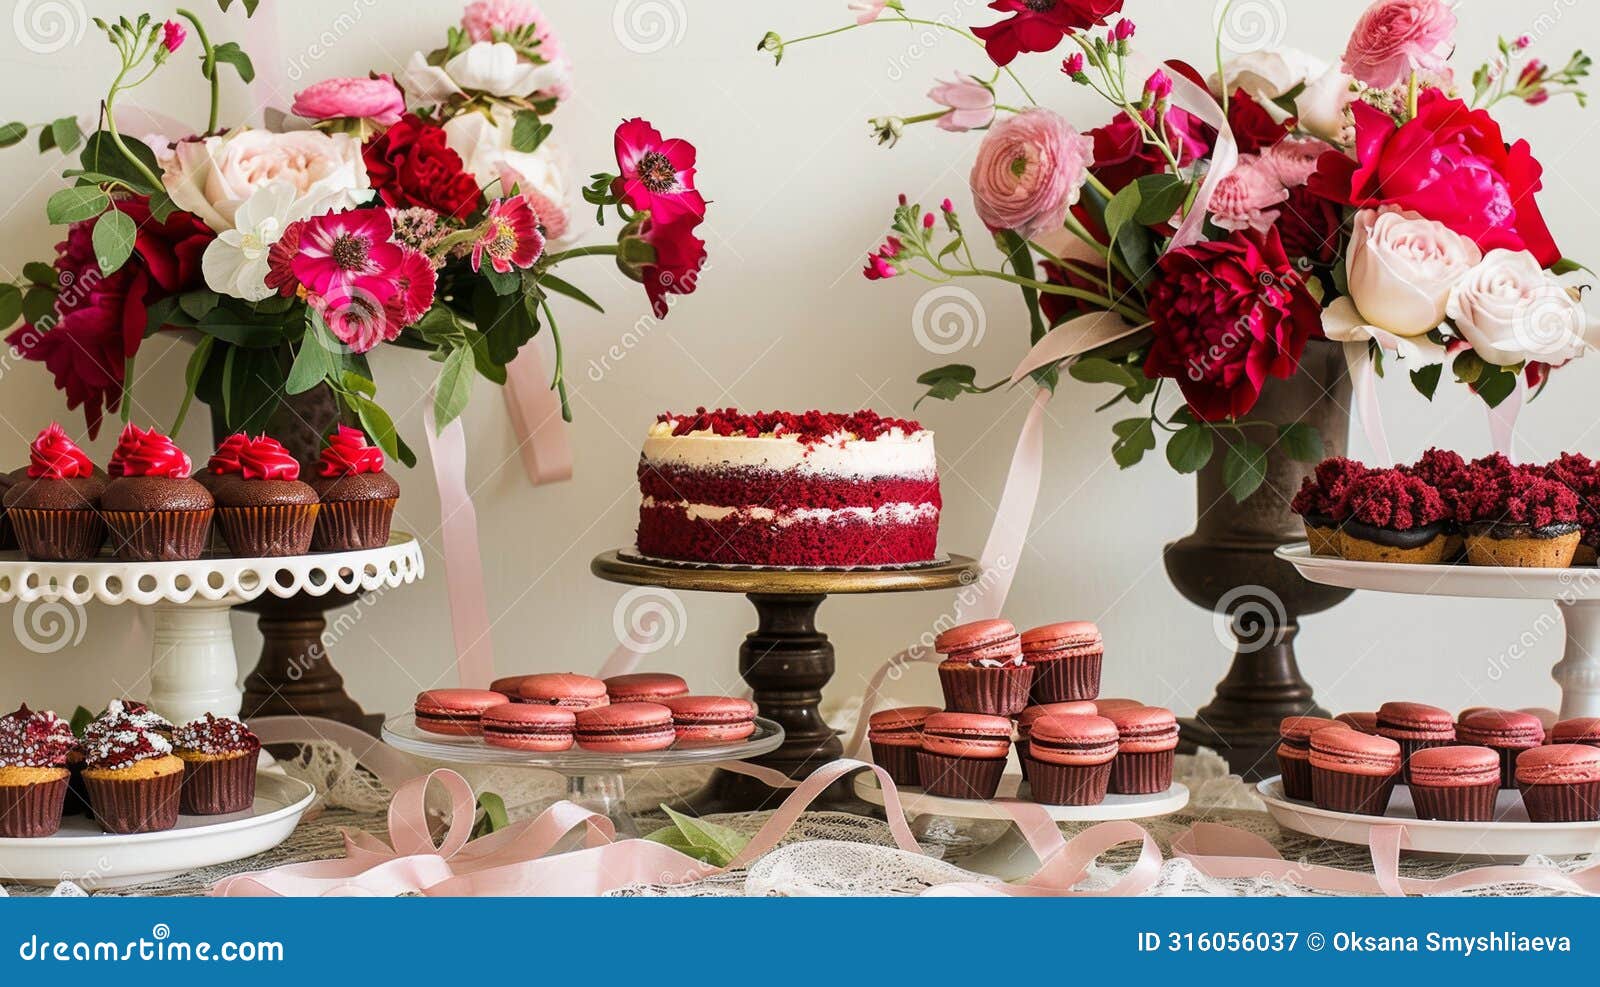 elegant dessert buffet with floral decorations for special occasions